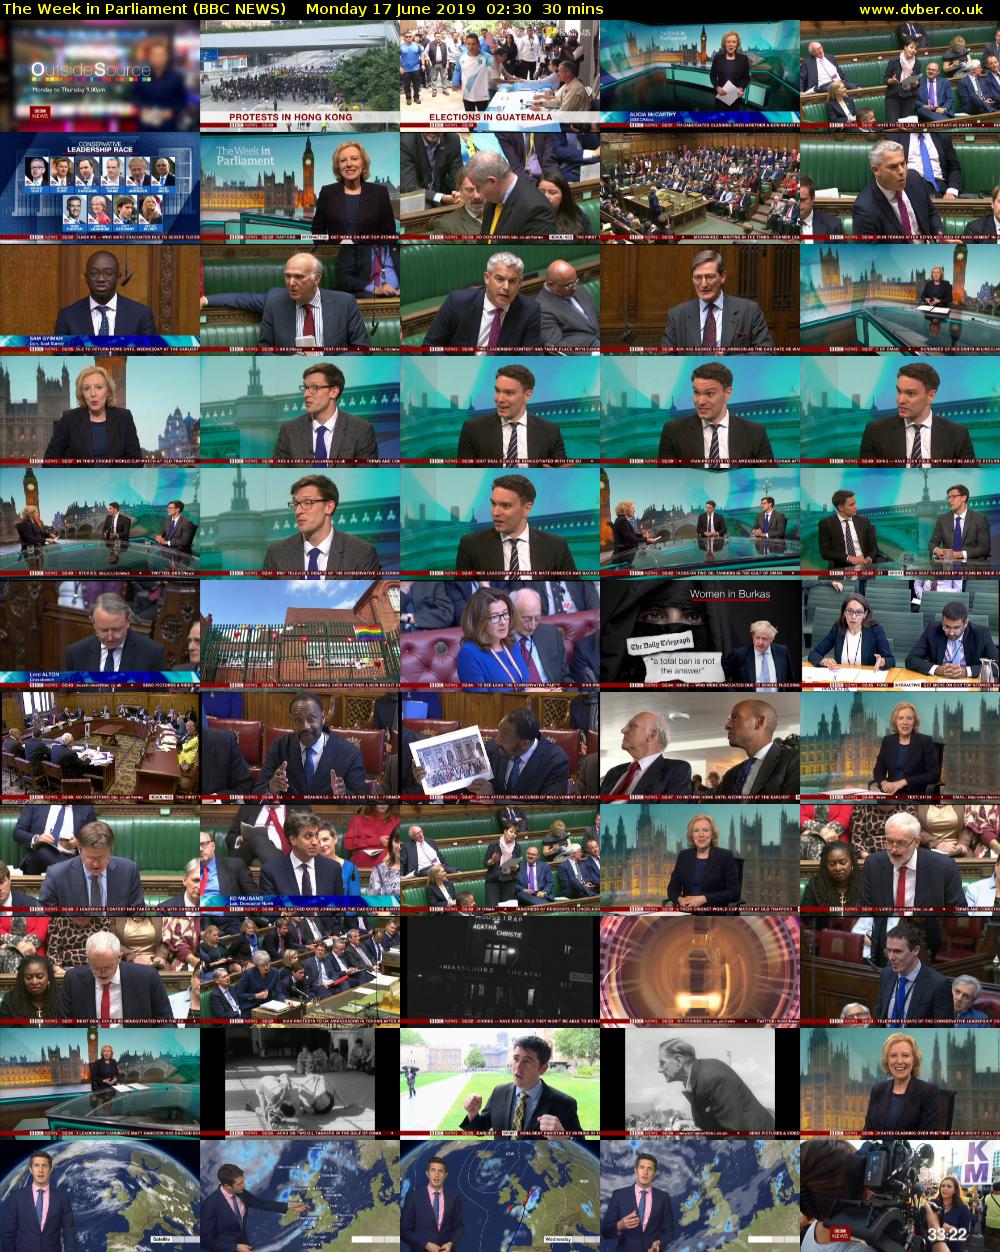 The Week in Parliament (BBC NEWS) Monday 17 June 2019 02:30 - 03:00